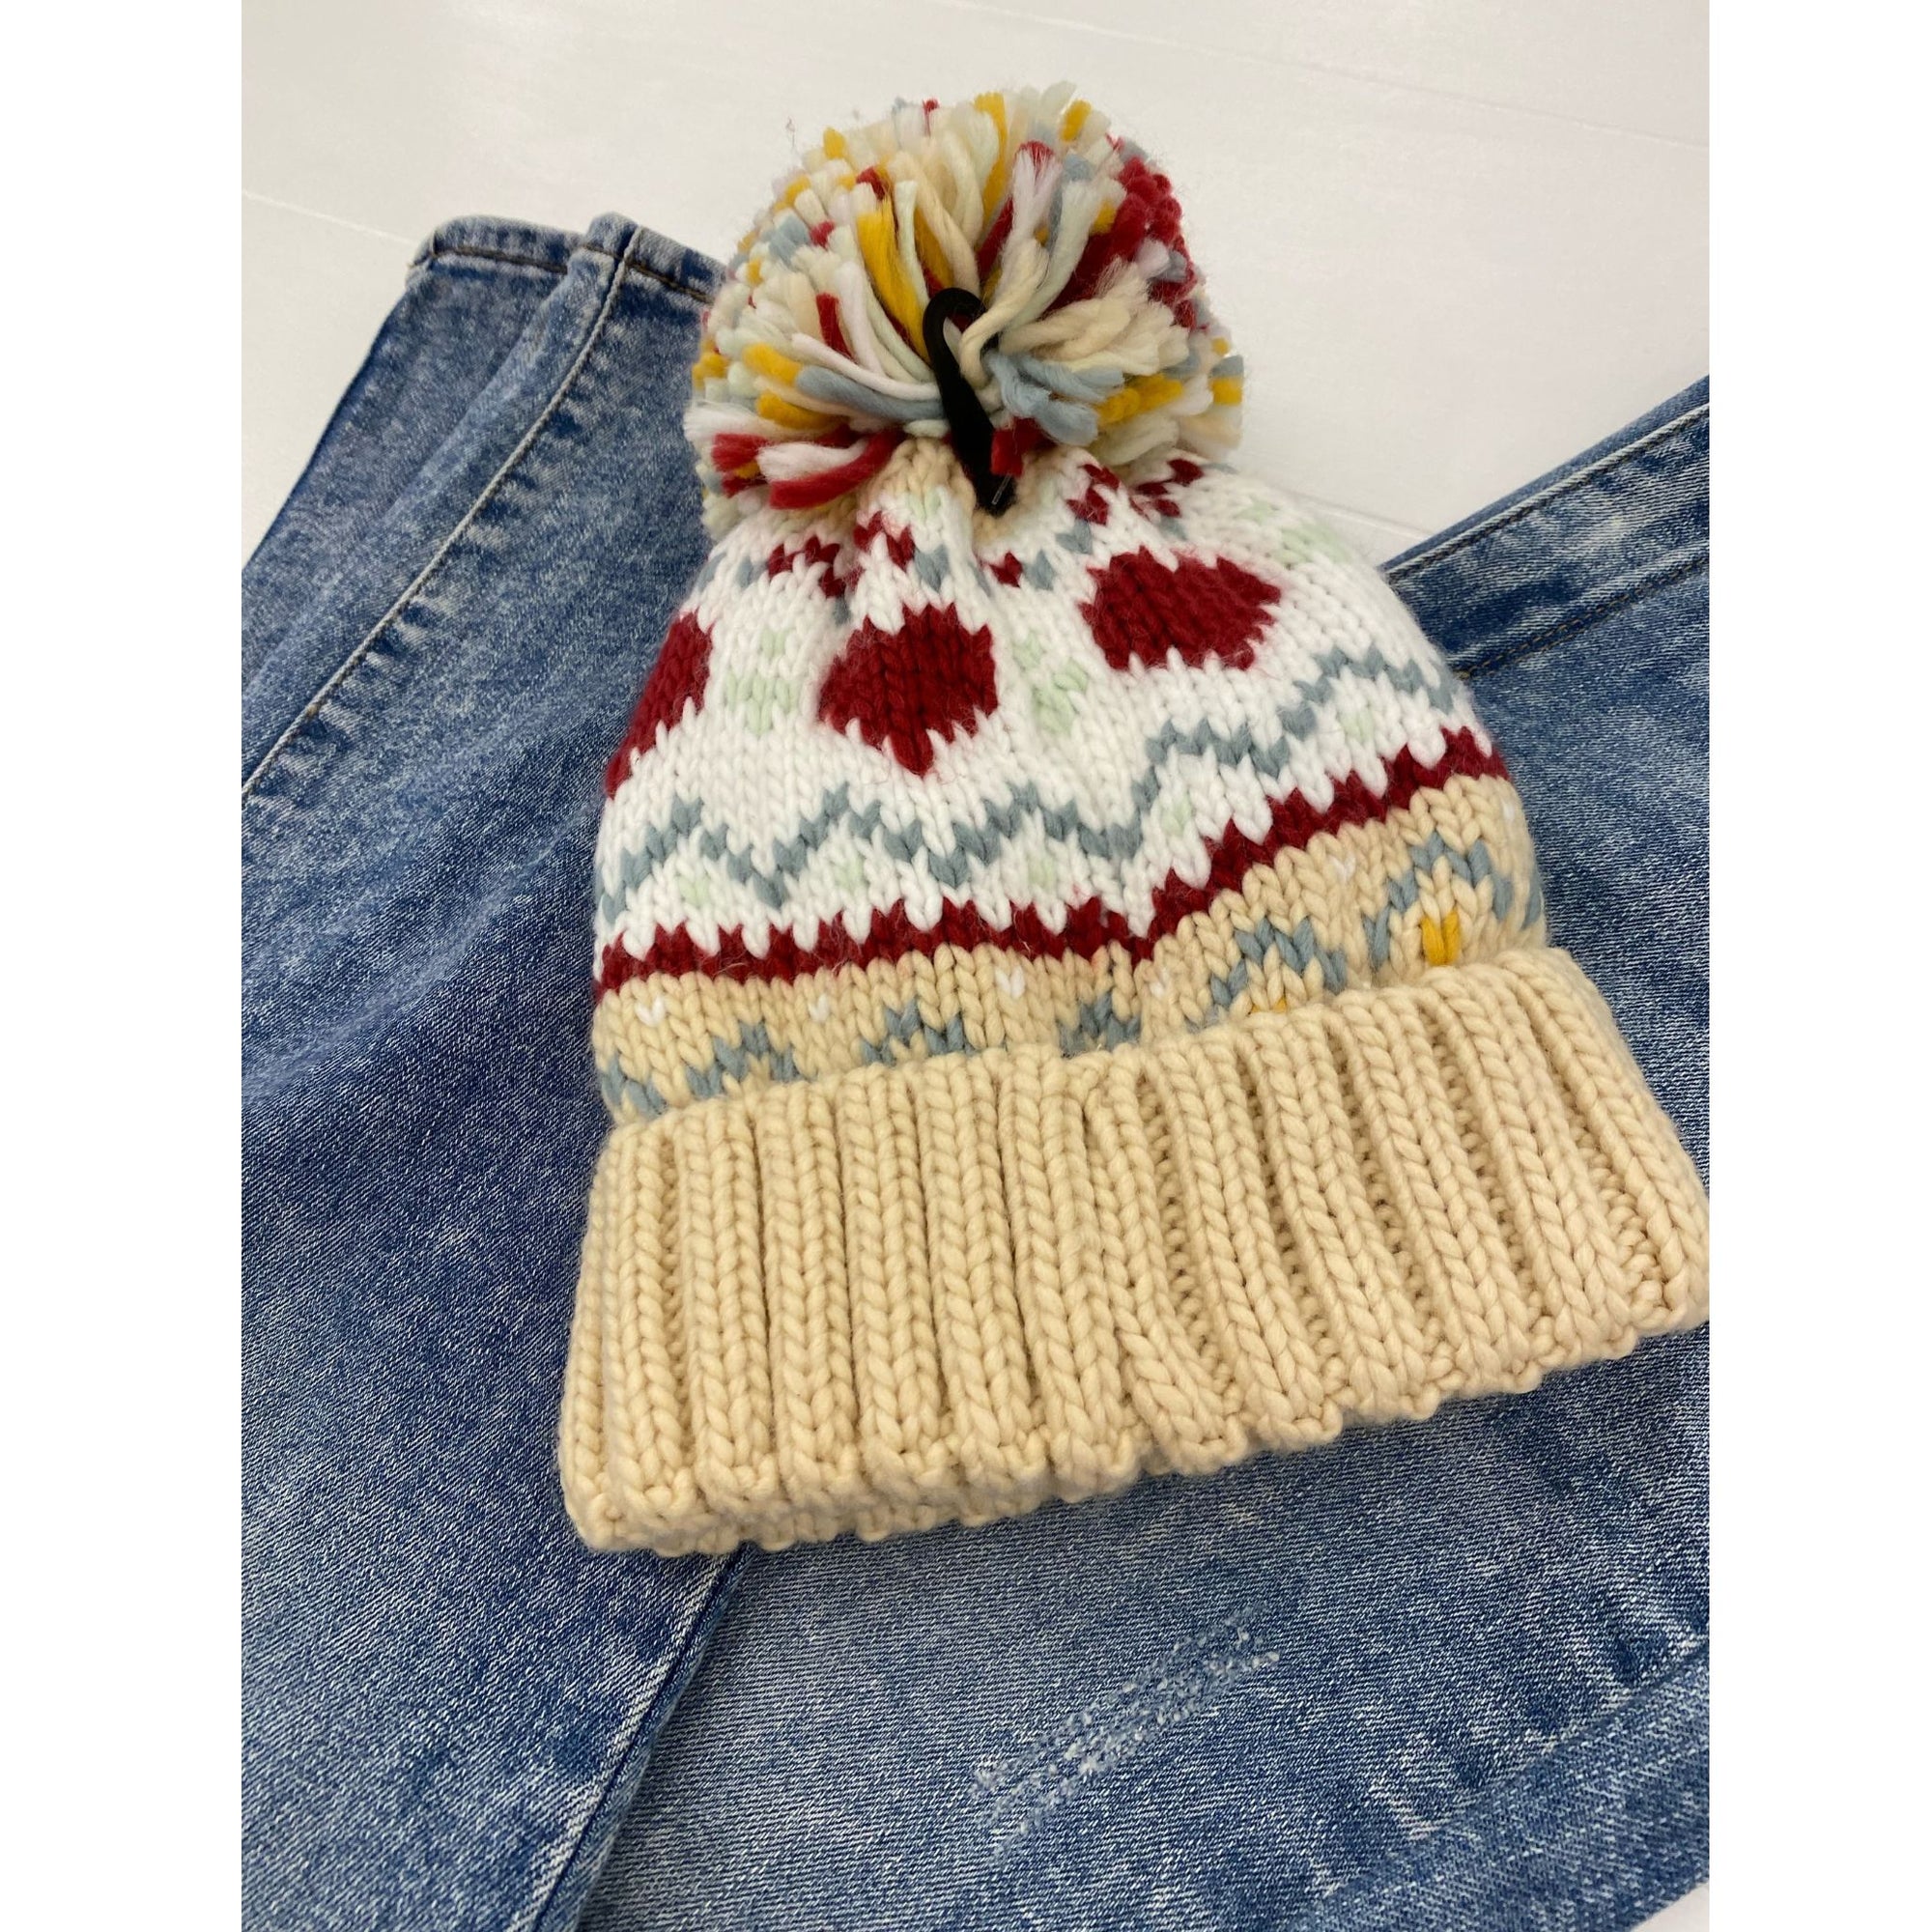 Multi-Colored Knit Heart Beanie with Pom